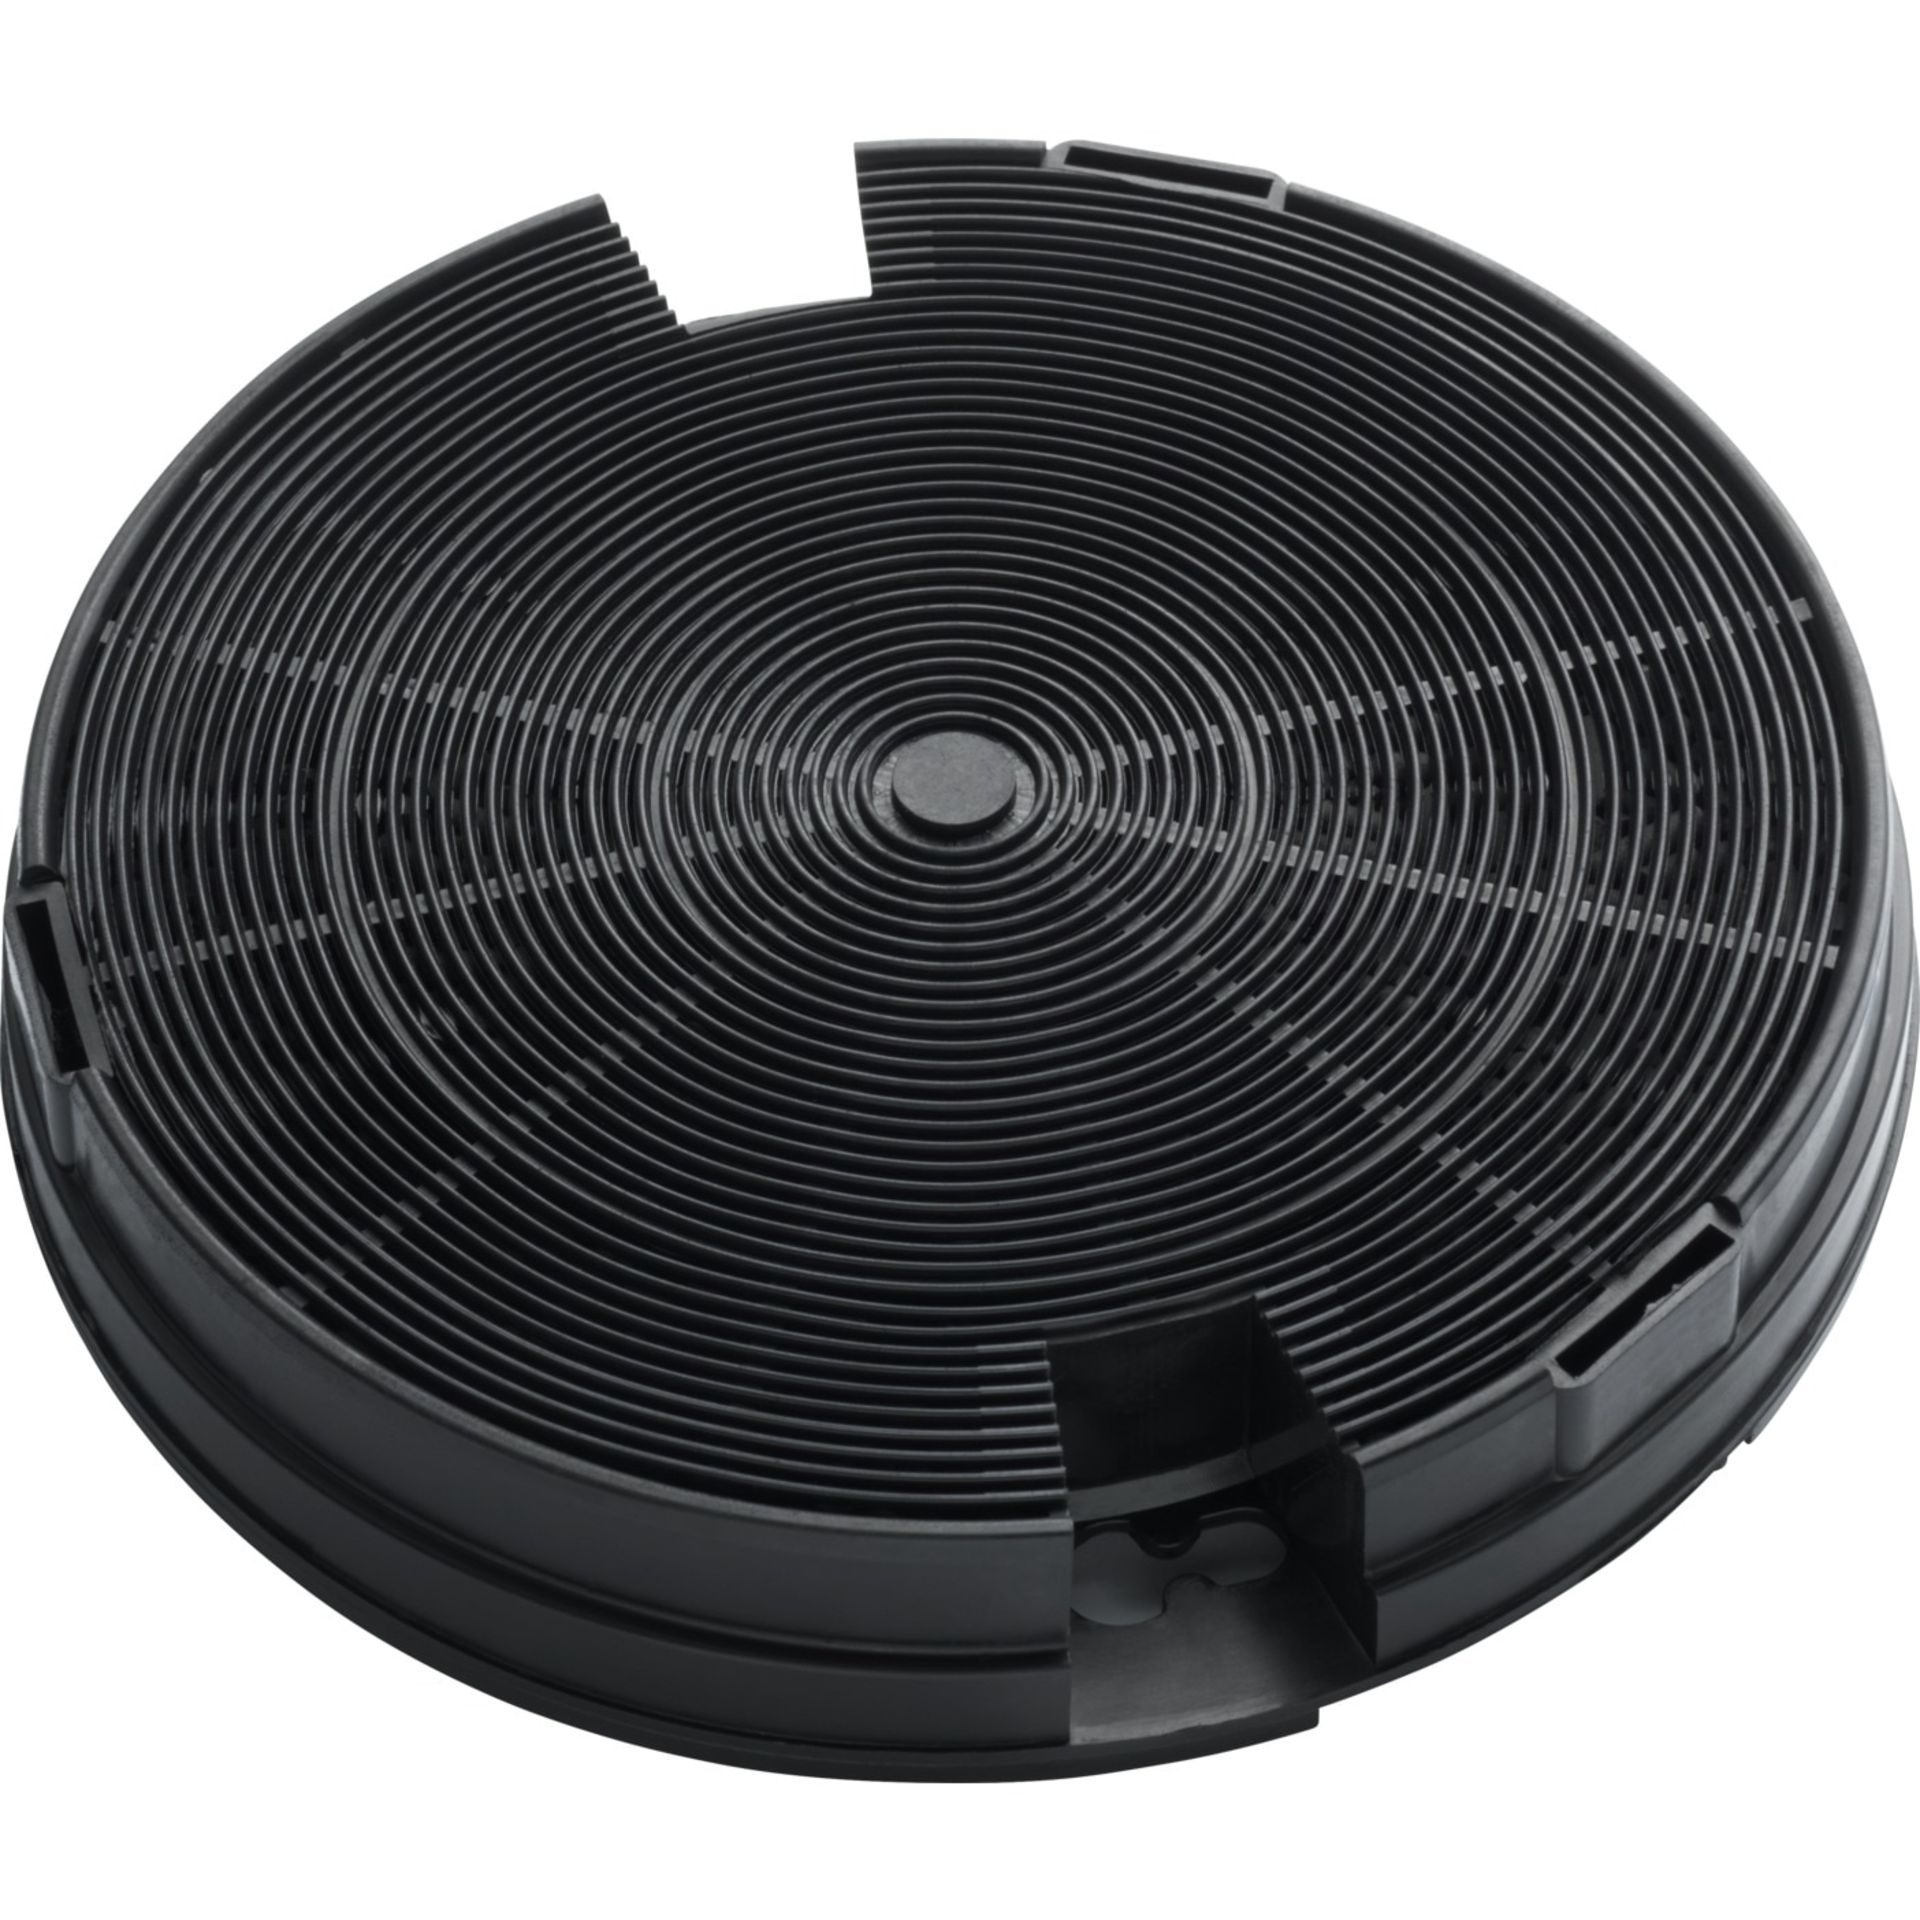 New(W183) Electrolux Carbon Filter For Cooker Hoods.